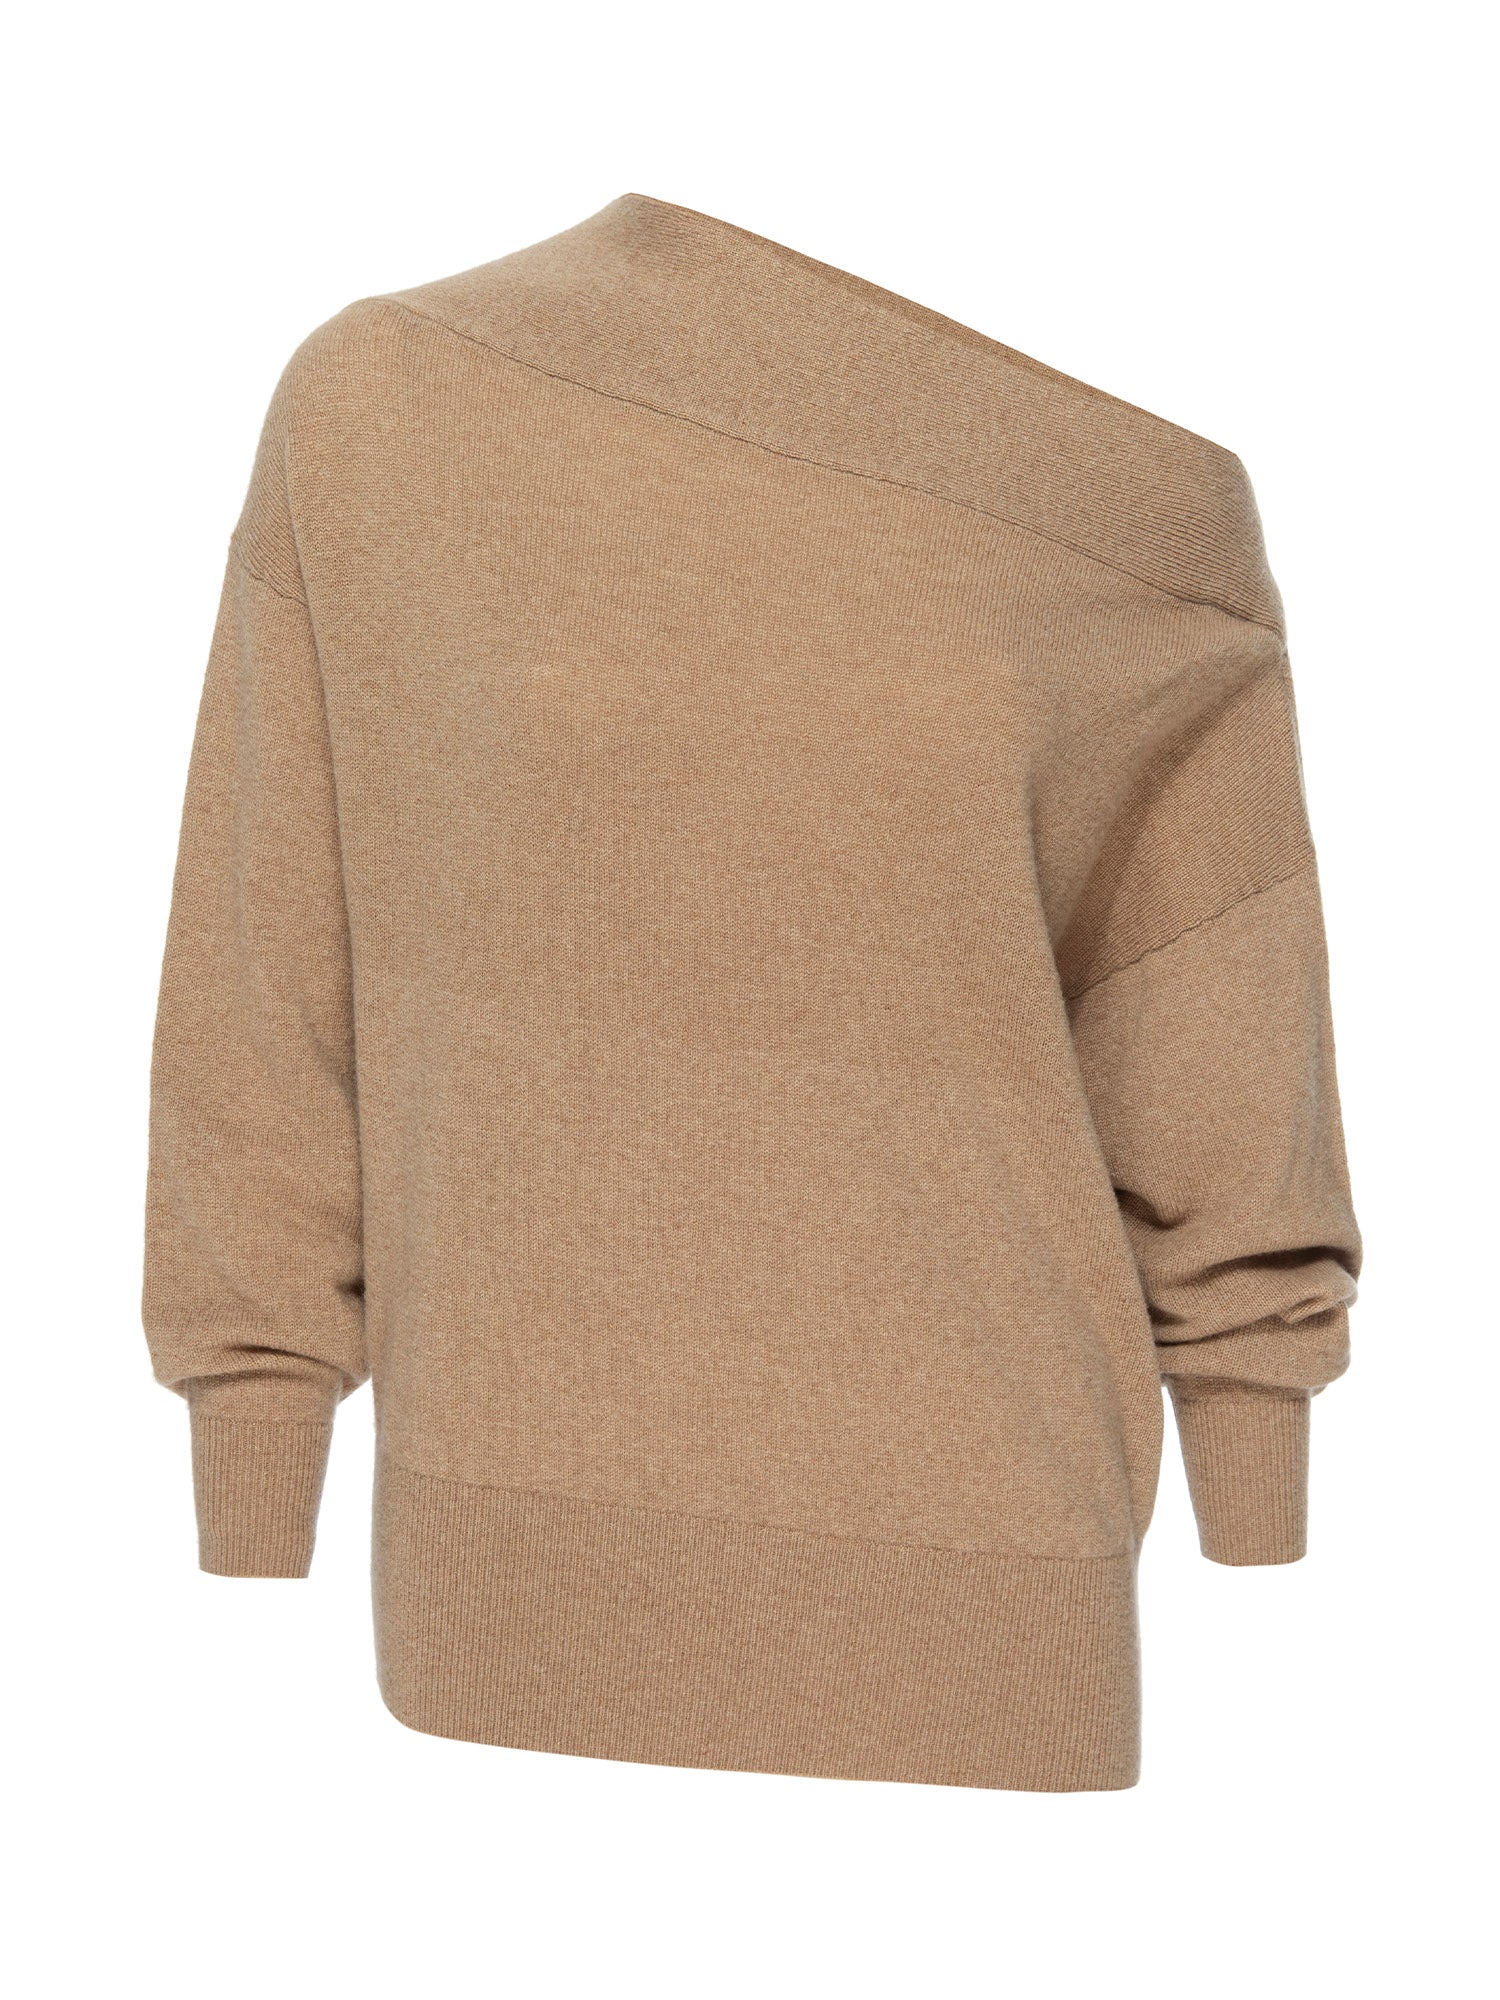 Dunne cashmere boatneck tan sweater flat view